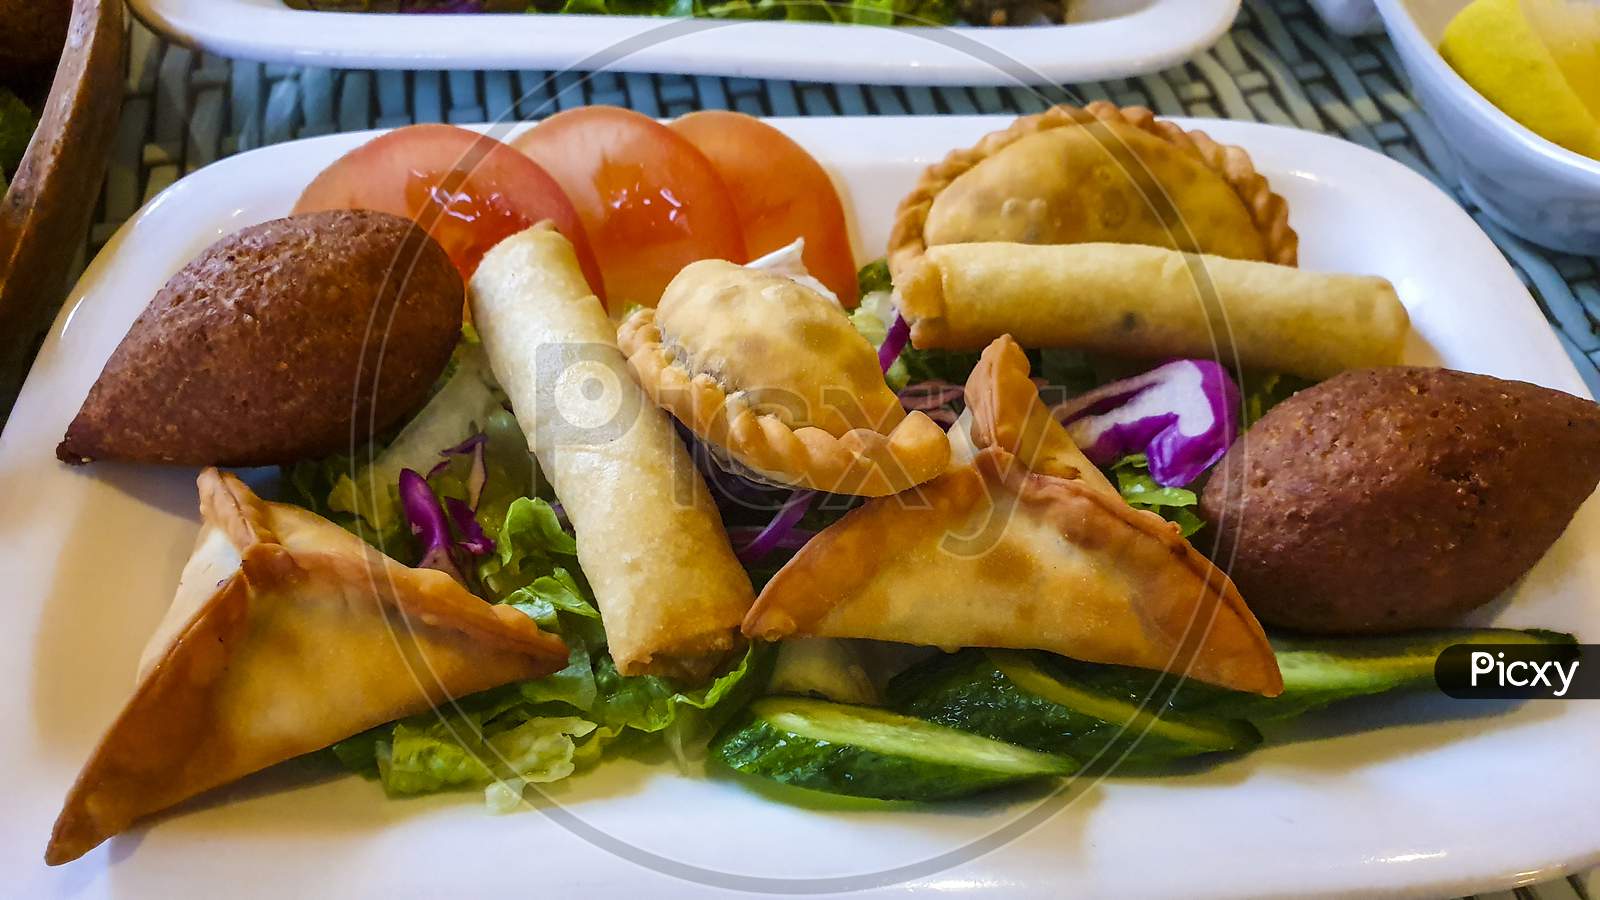 Arabic Set Of Food, Vegetables And Pastries.